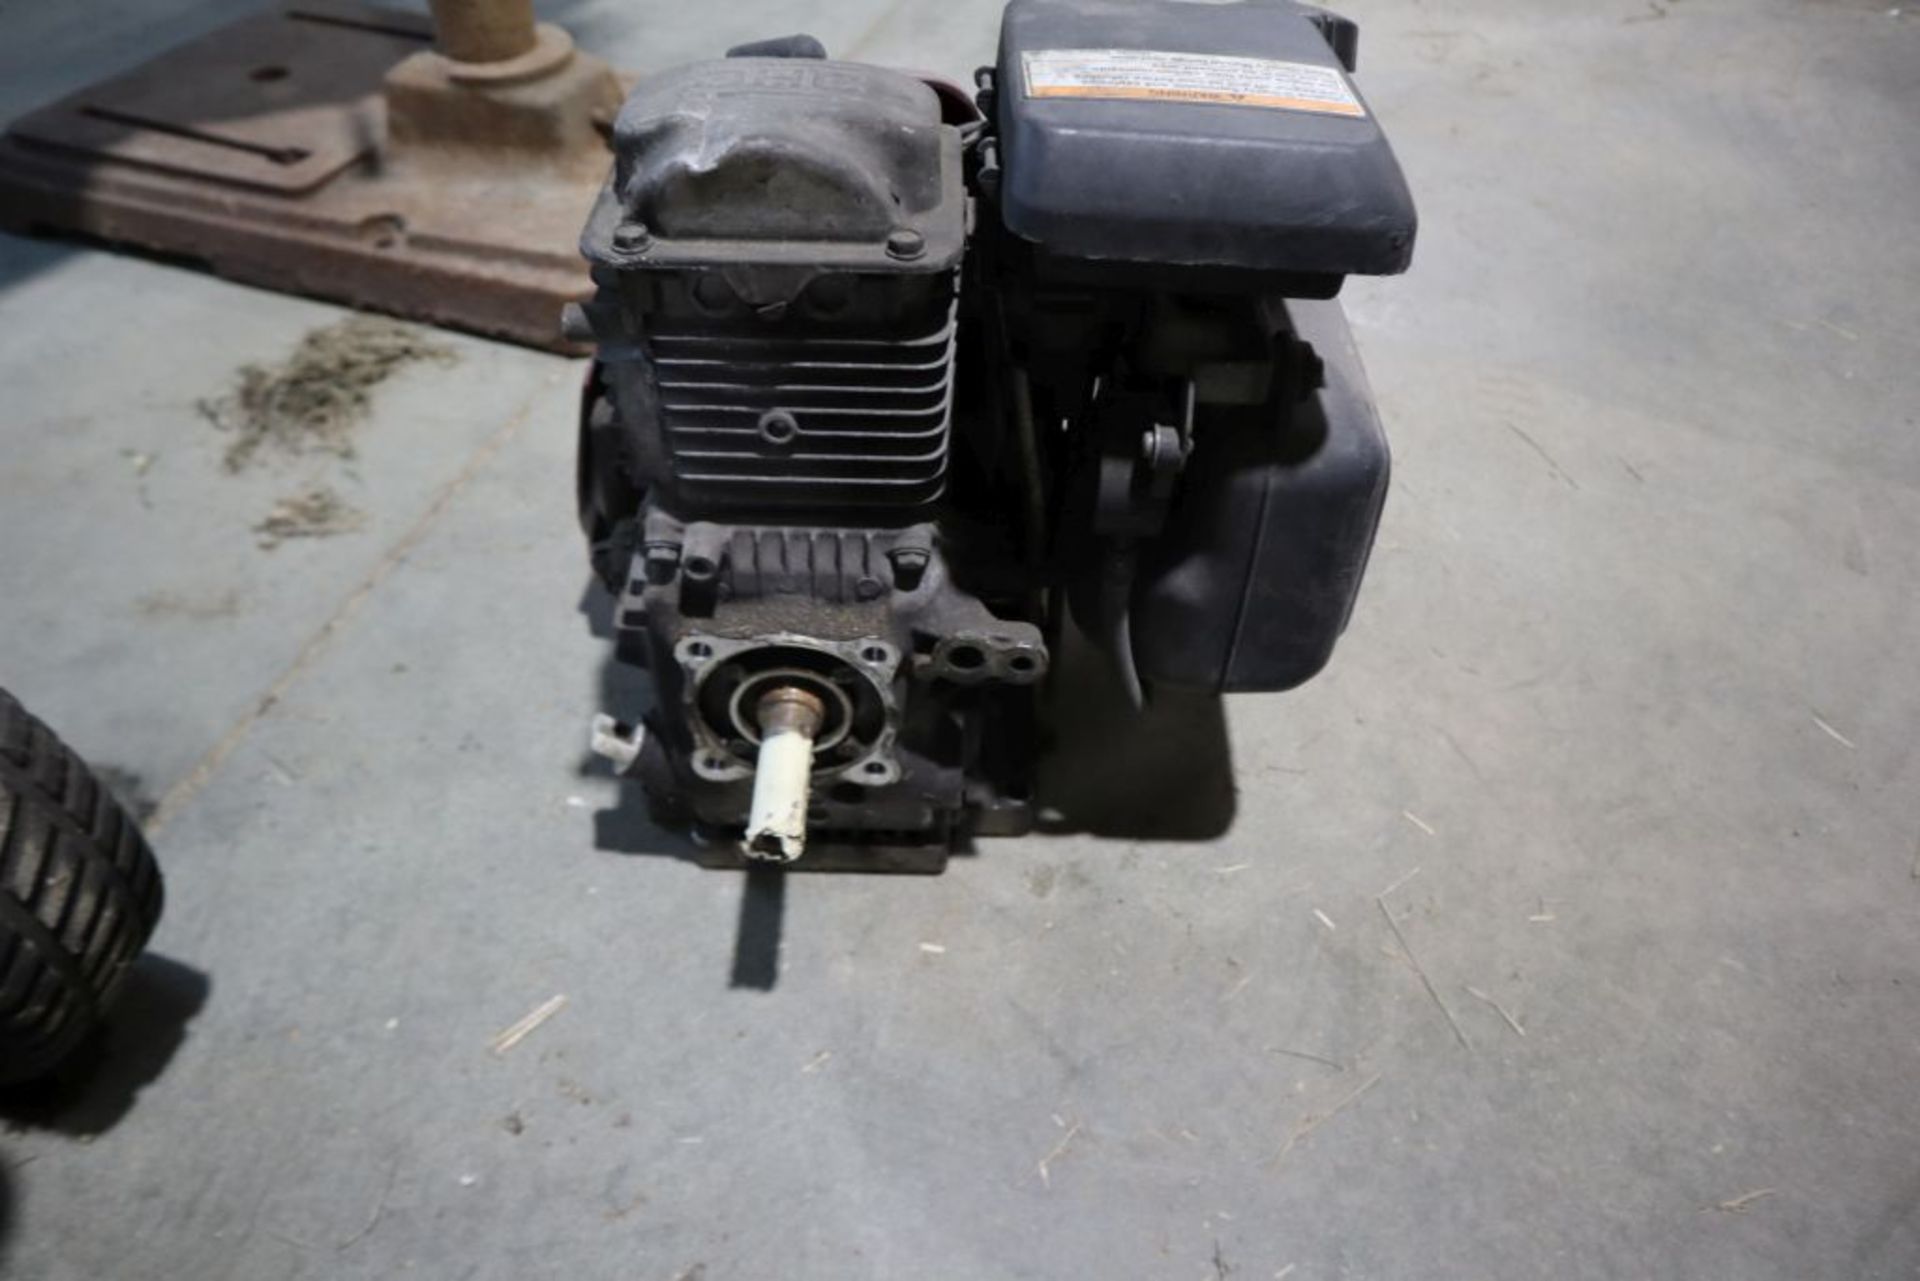 Honda GC 190 Gas Engine, cond. unknown, - Image 2 of 4